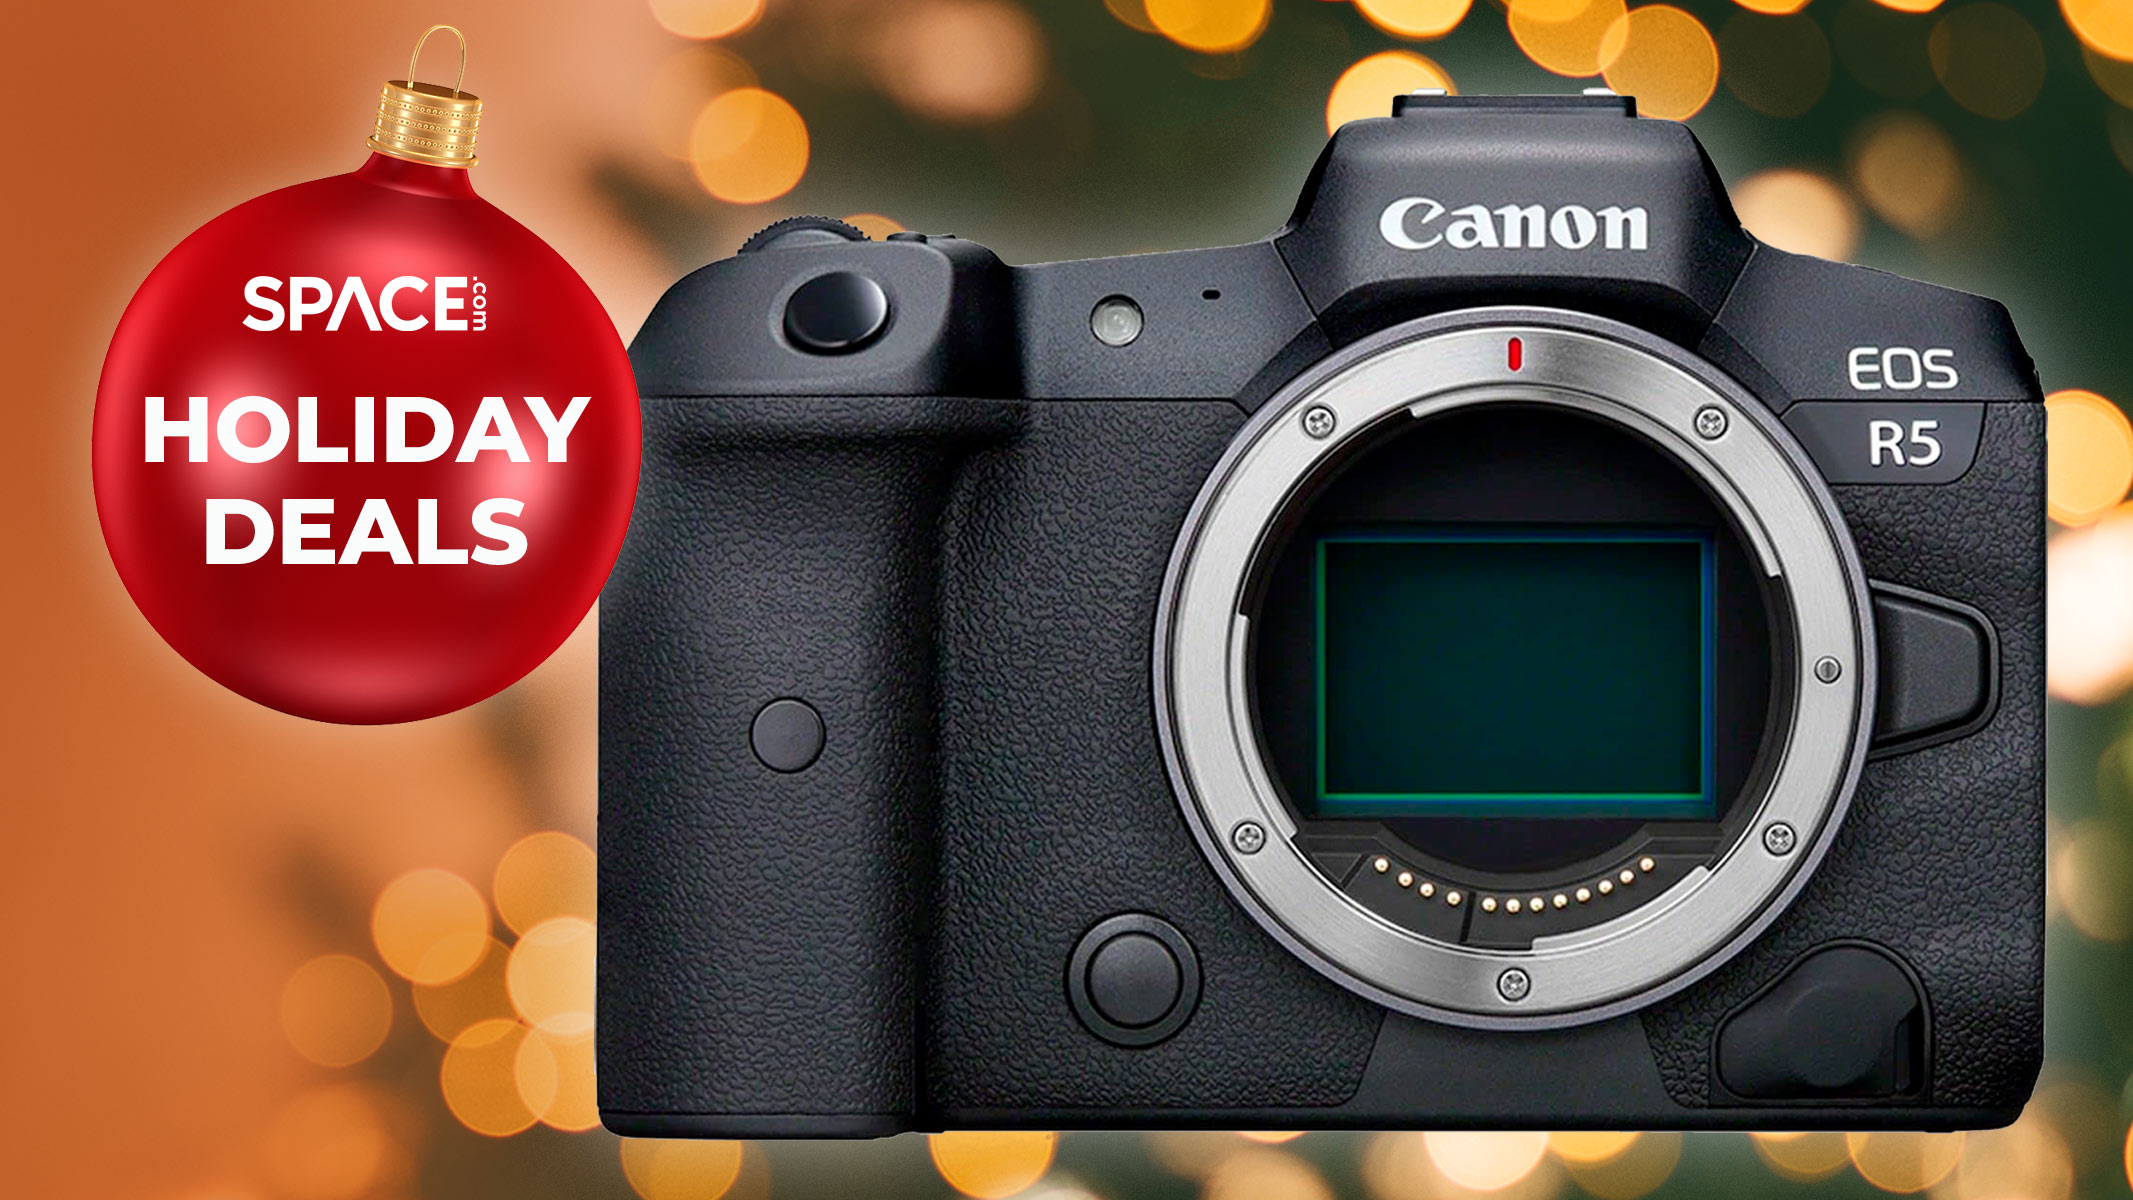 Christmas camera deal: $900 off Canon EOS R5 in lowest ever price! Space